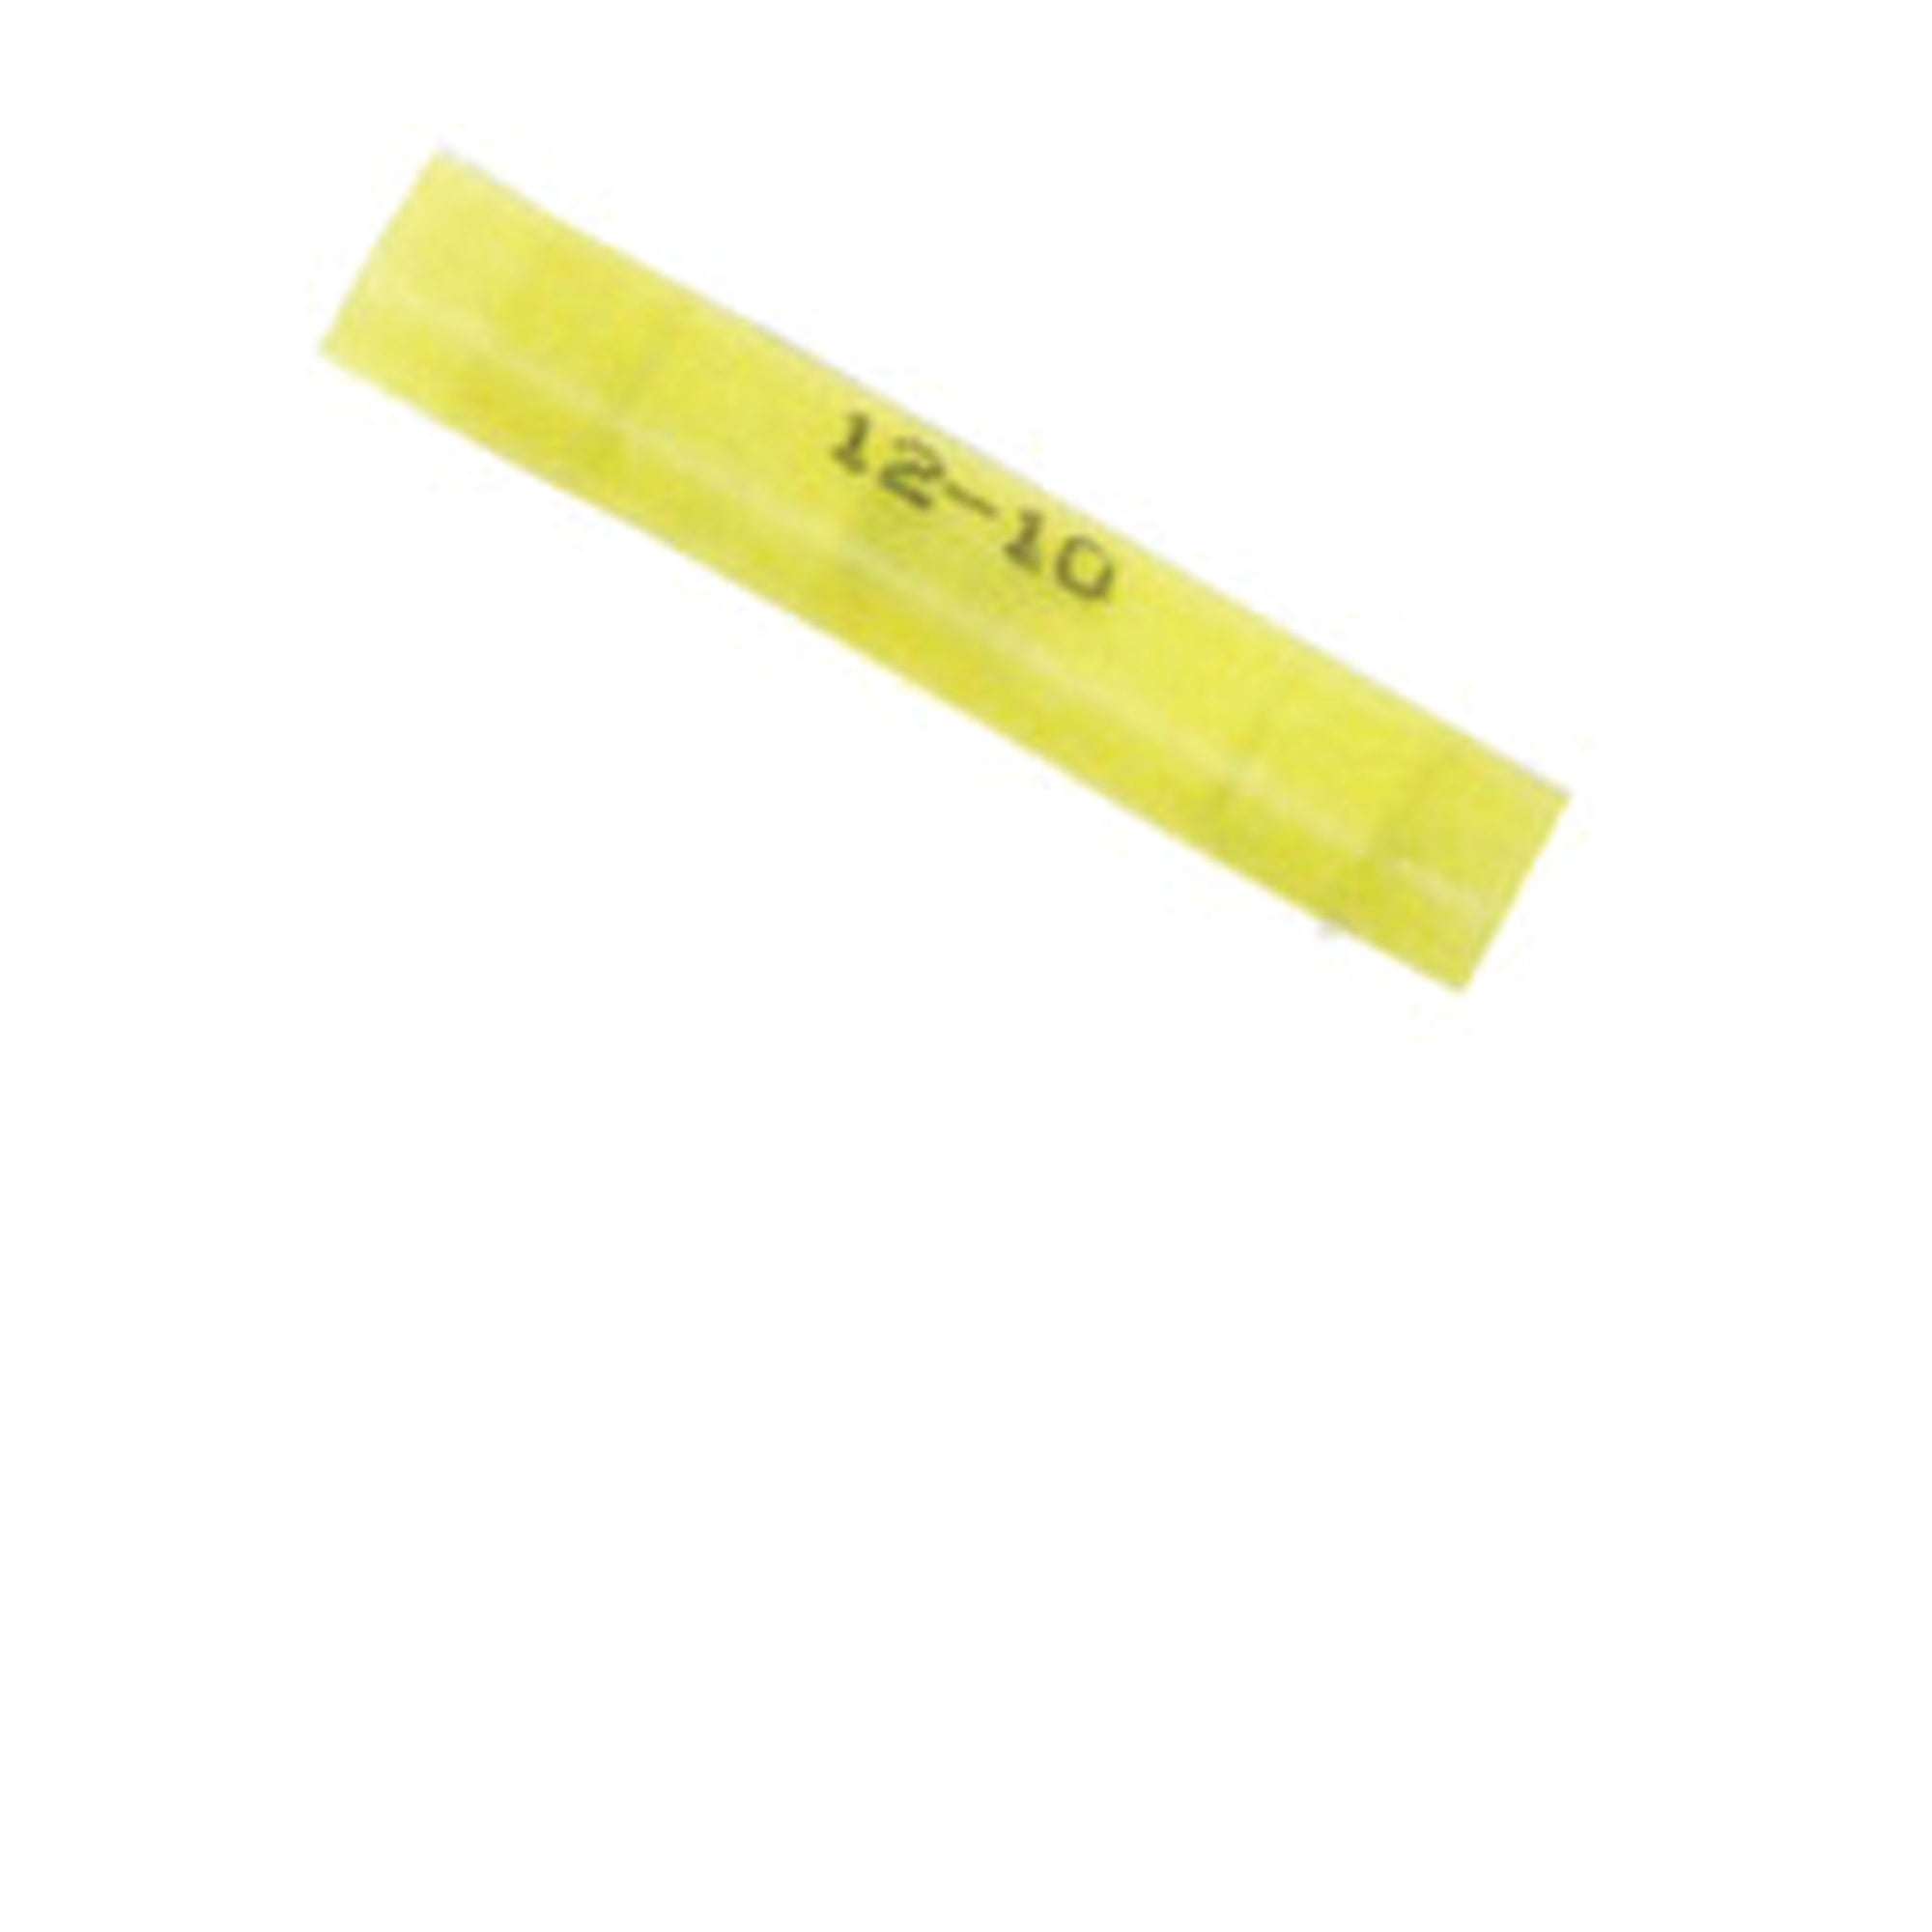 Ancor 230120 Marine Grade Butt Connector - 12-10, Yellow, Pack of 7